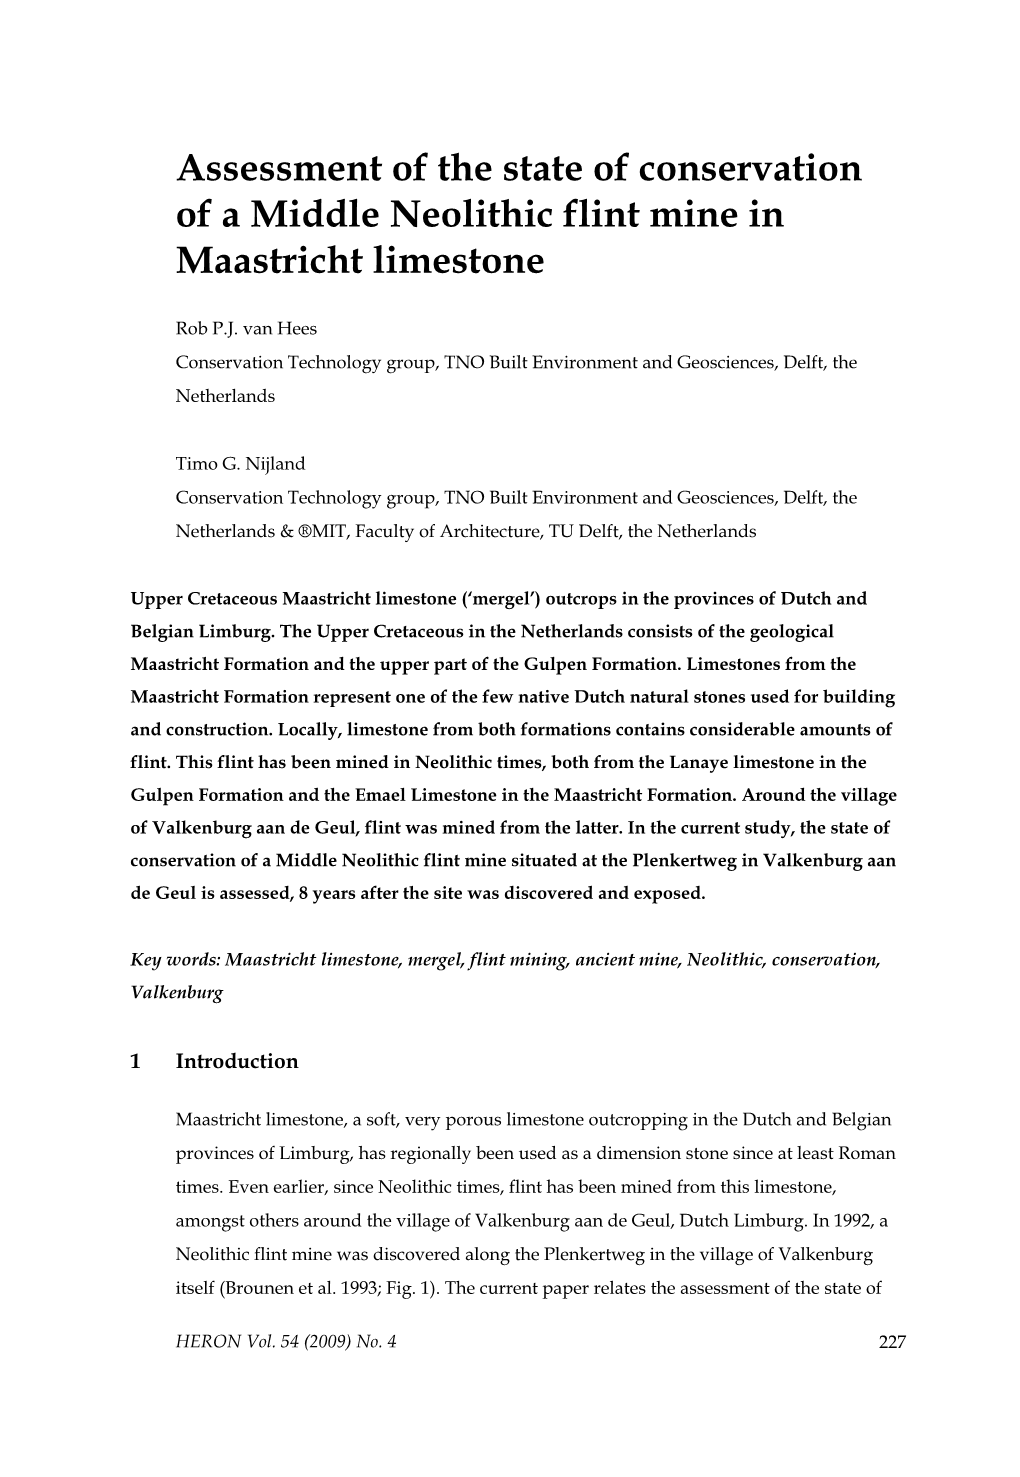 Assessment of the State of Conservation of a Middle Neolithic Flint Mine in Maastricht Limestone